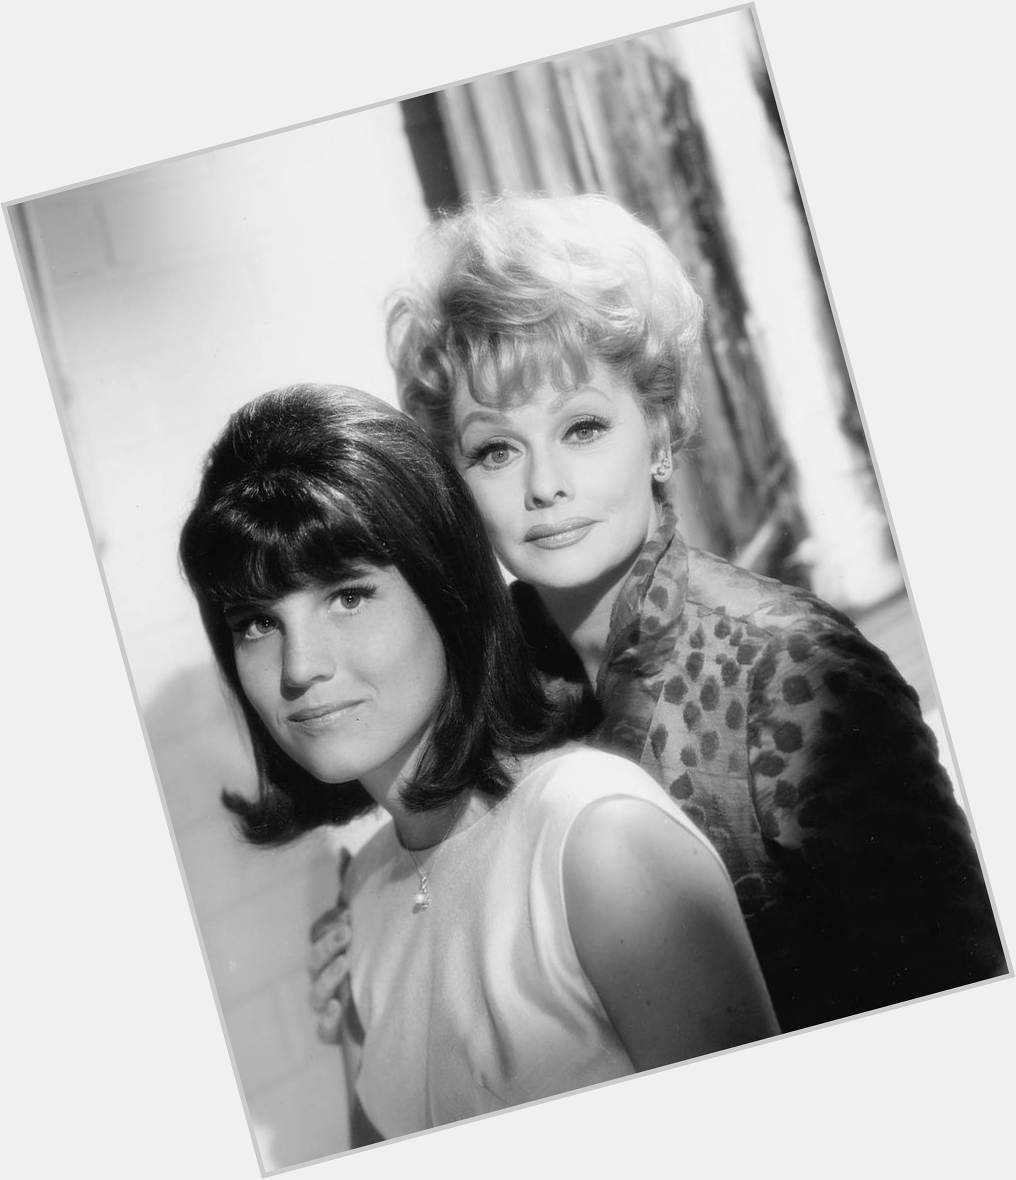 Happy birthday to the lovely Lucie Arnaz! 